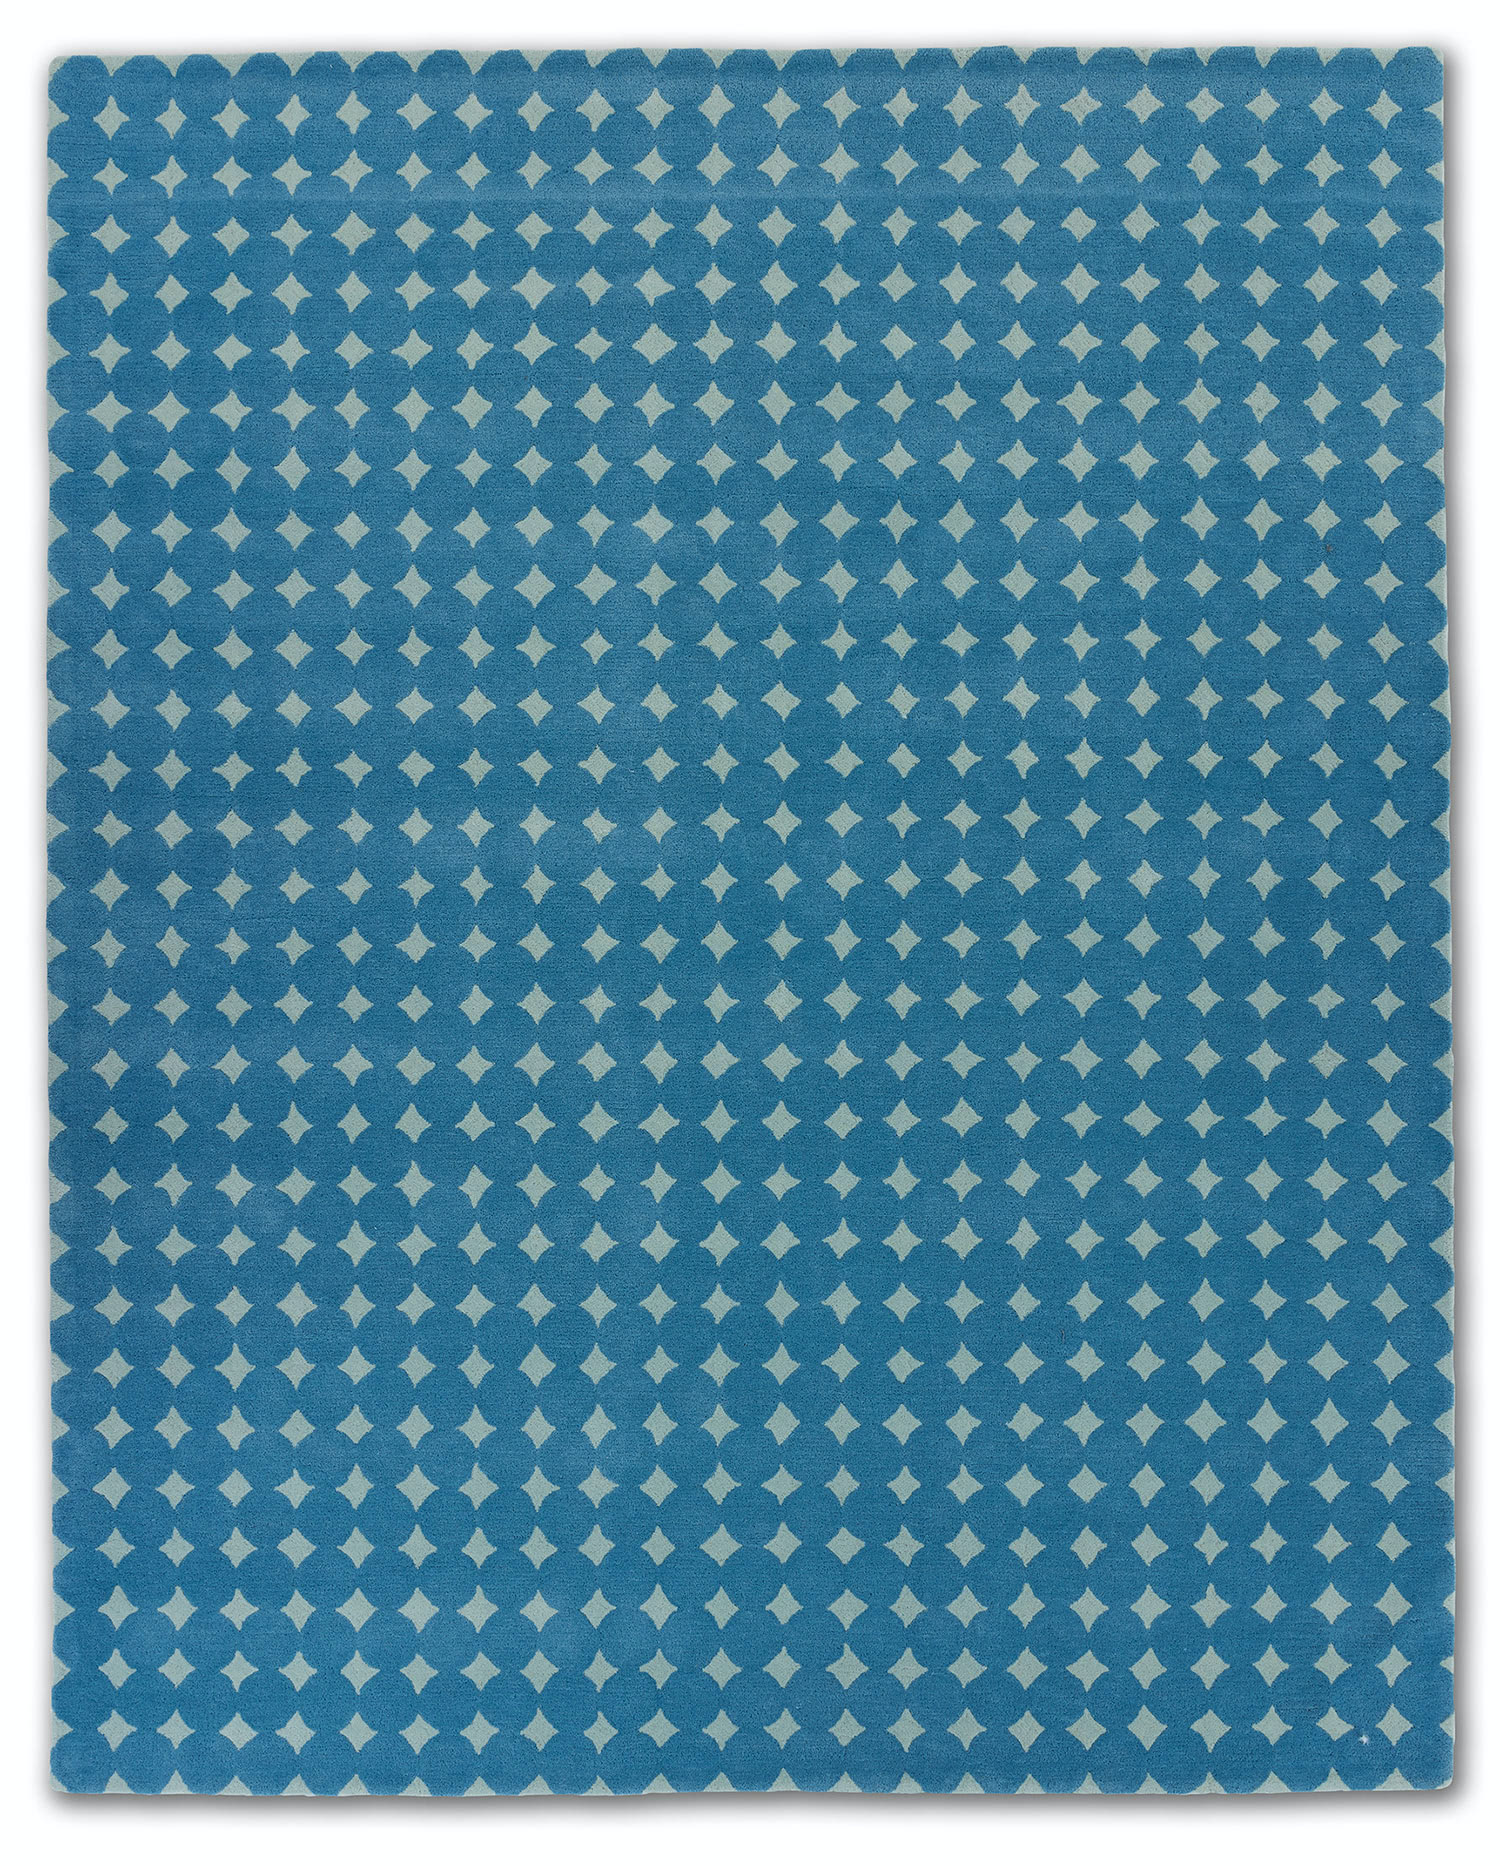 A blue area rug called Bongo Pool in an 8 by 10 foot size